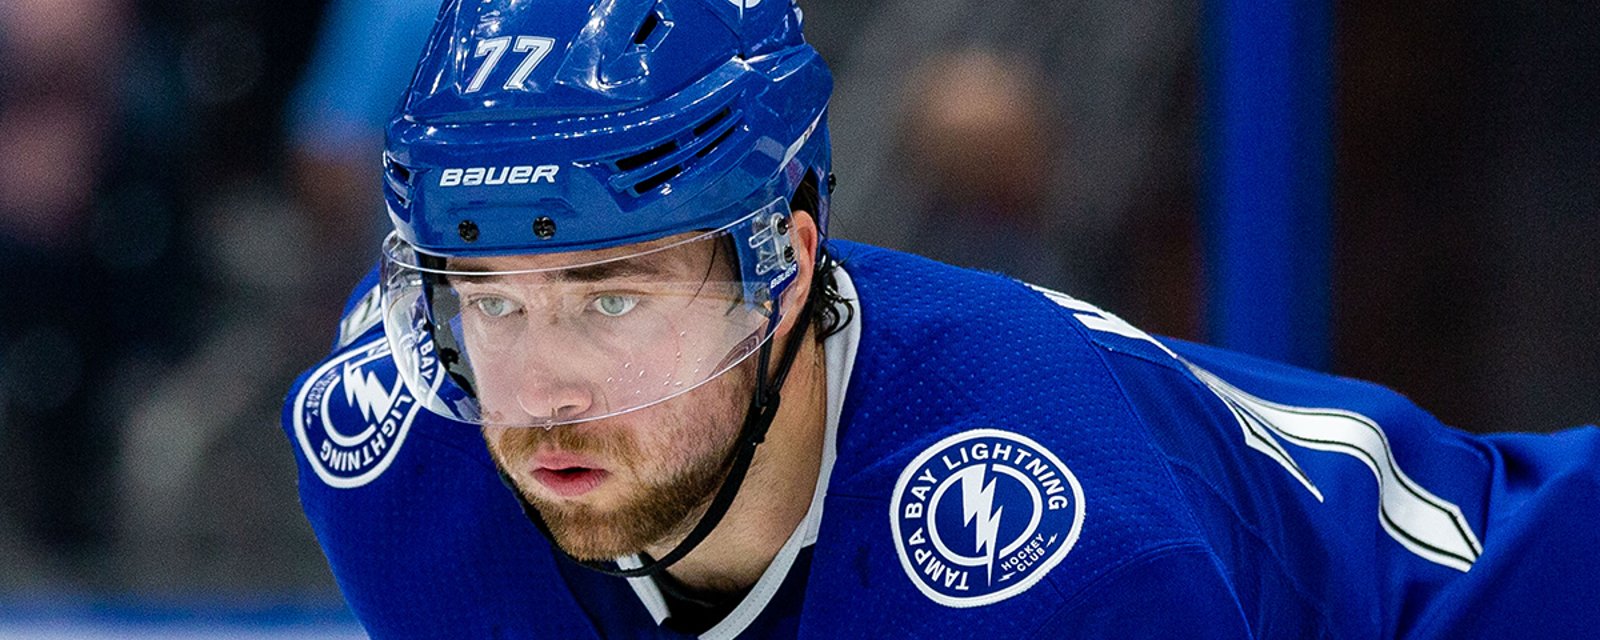 Hedman throws shade at Marner ahead of tonight’s game